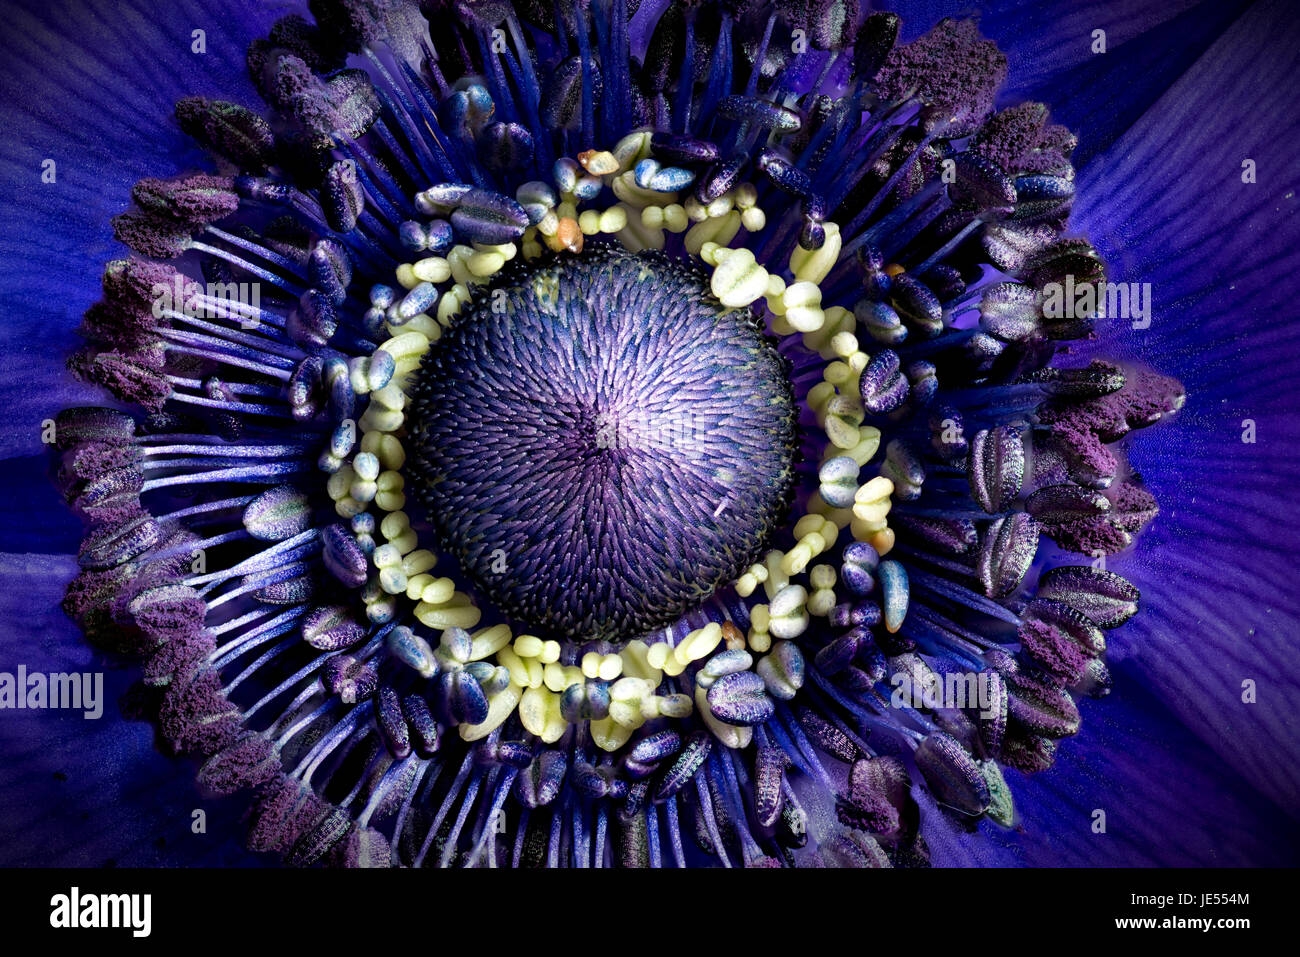 Focus stacking is showing the tiny details of an anemone. Stock Photo